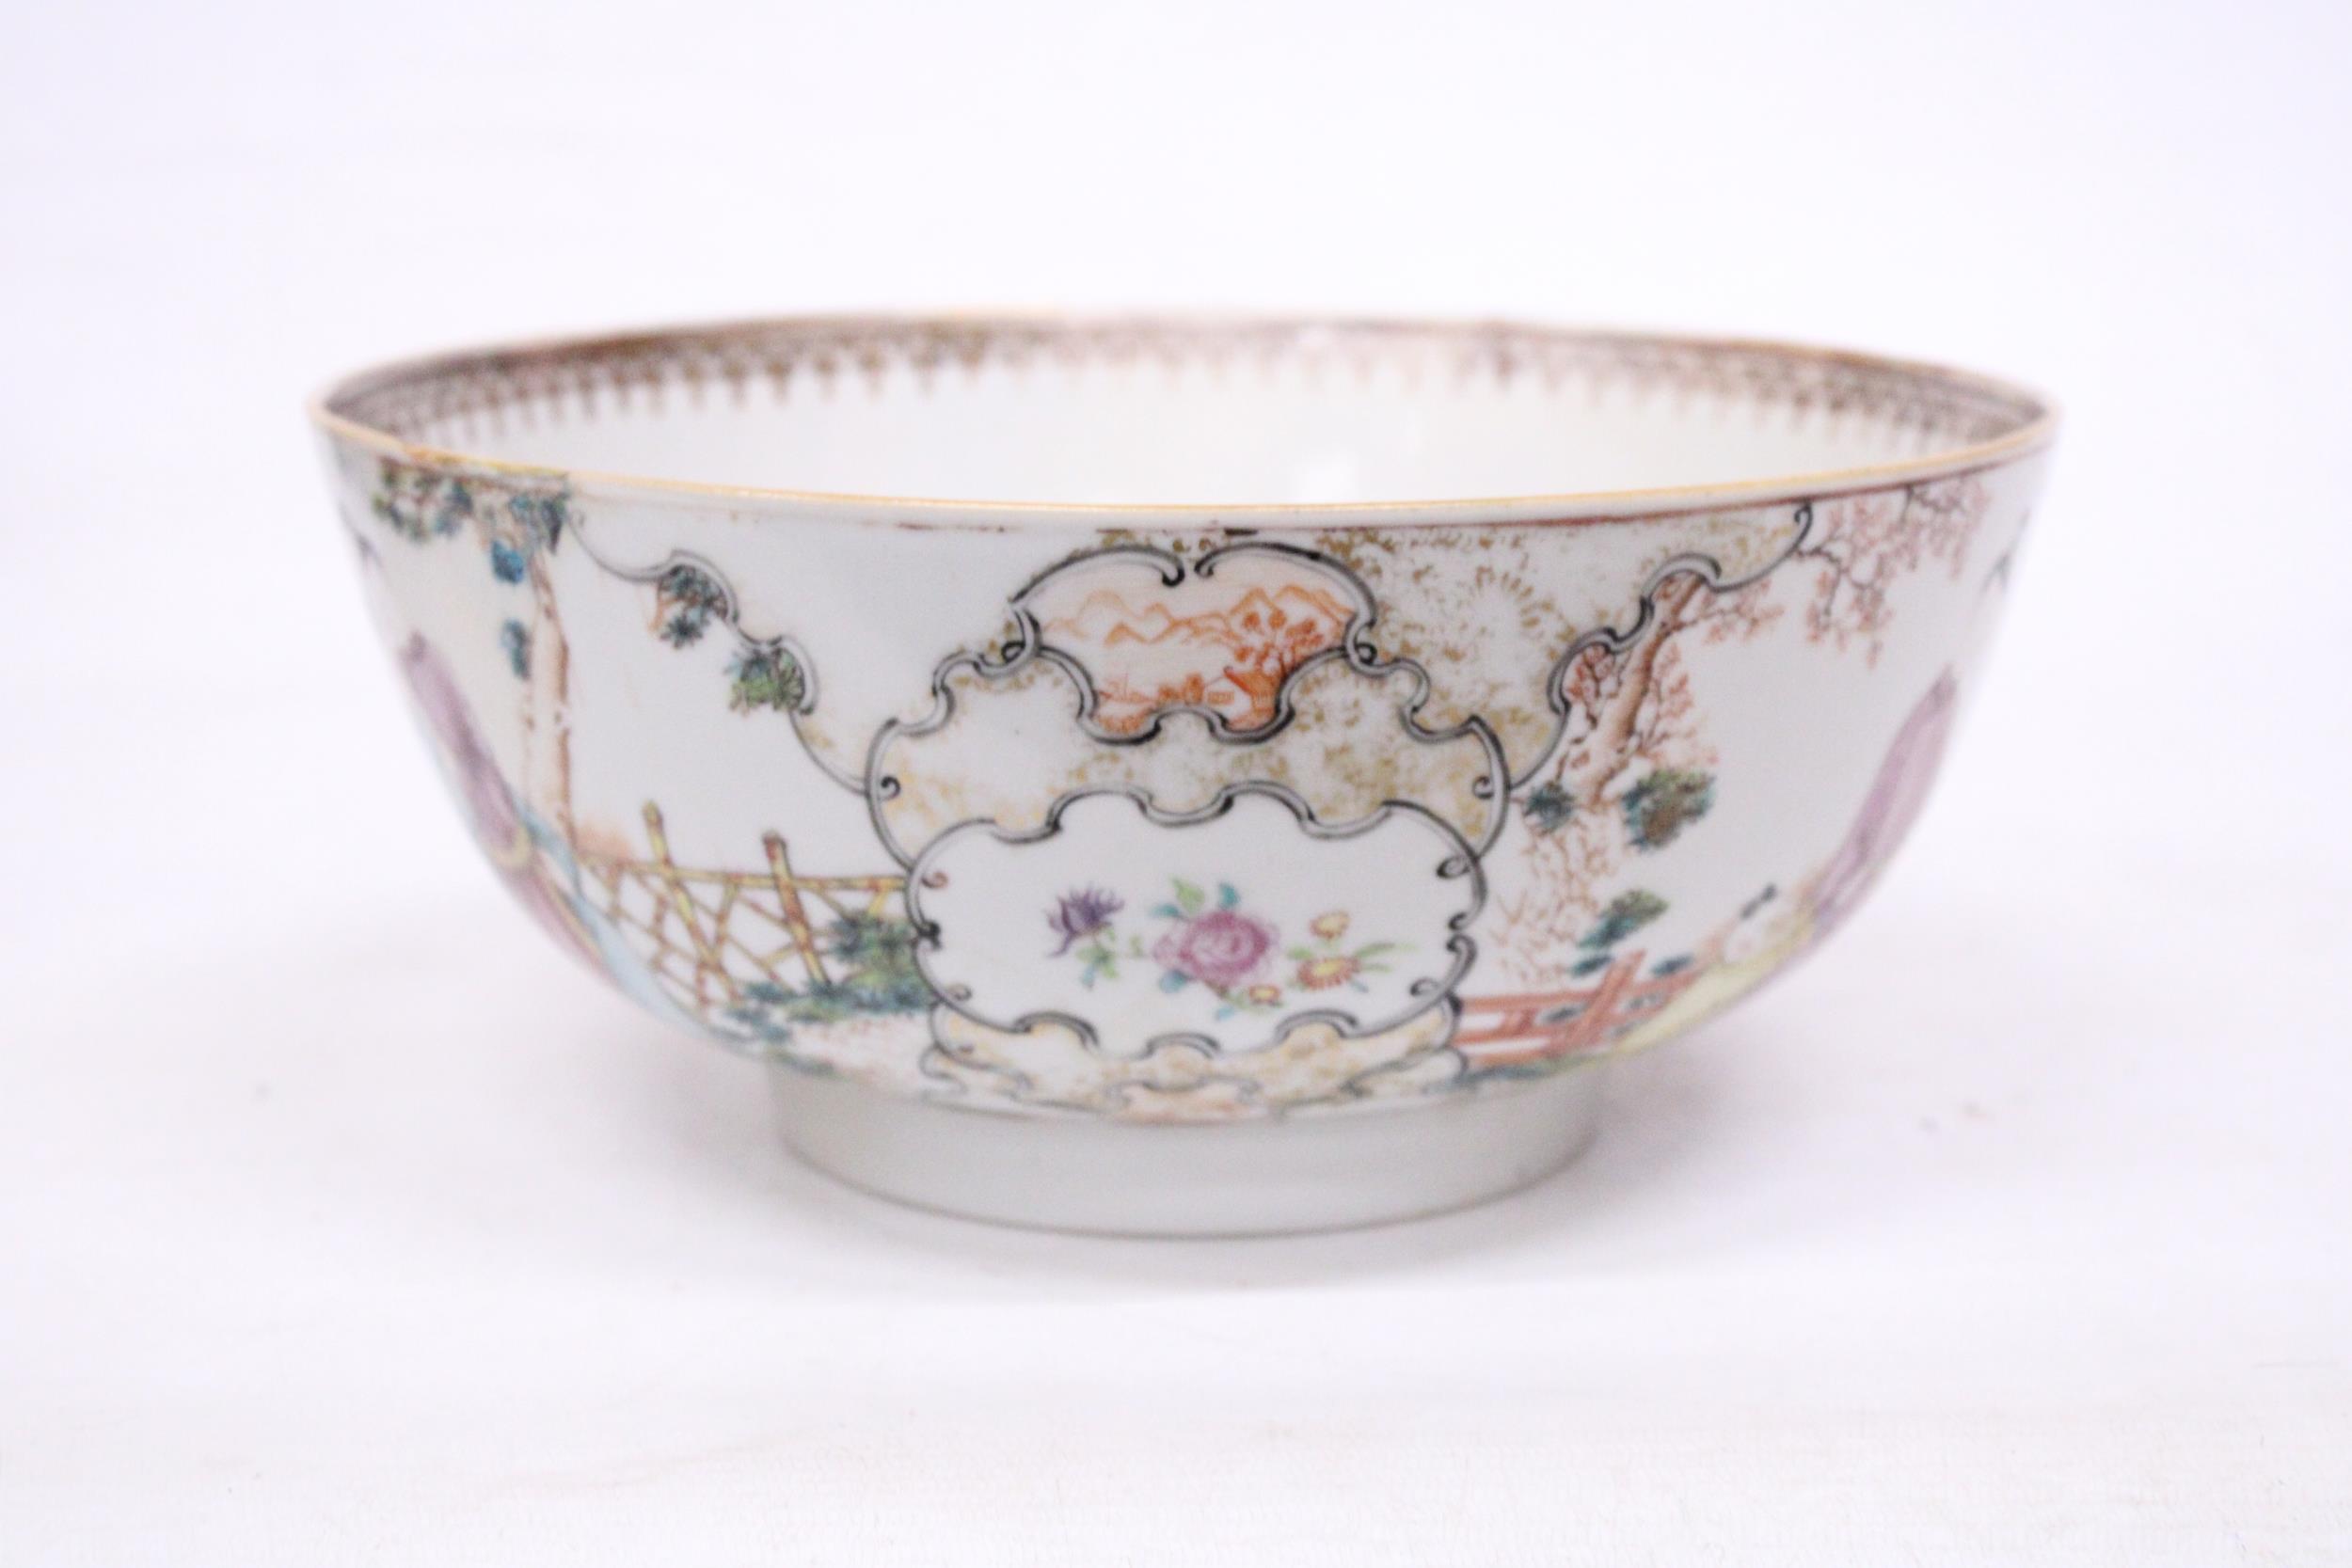 A CHINESE EXPORT FIGURAL DESIGN FOOTED BOWL - 11 CM (H) - 25.5 (D) - Image 2 of 7